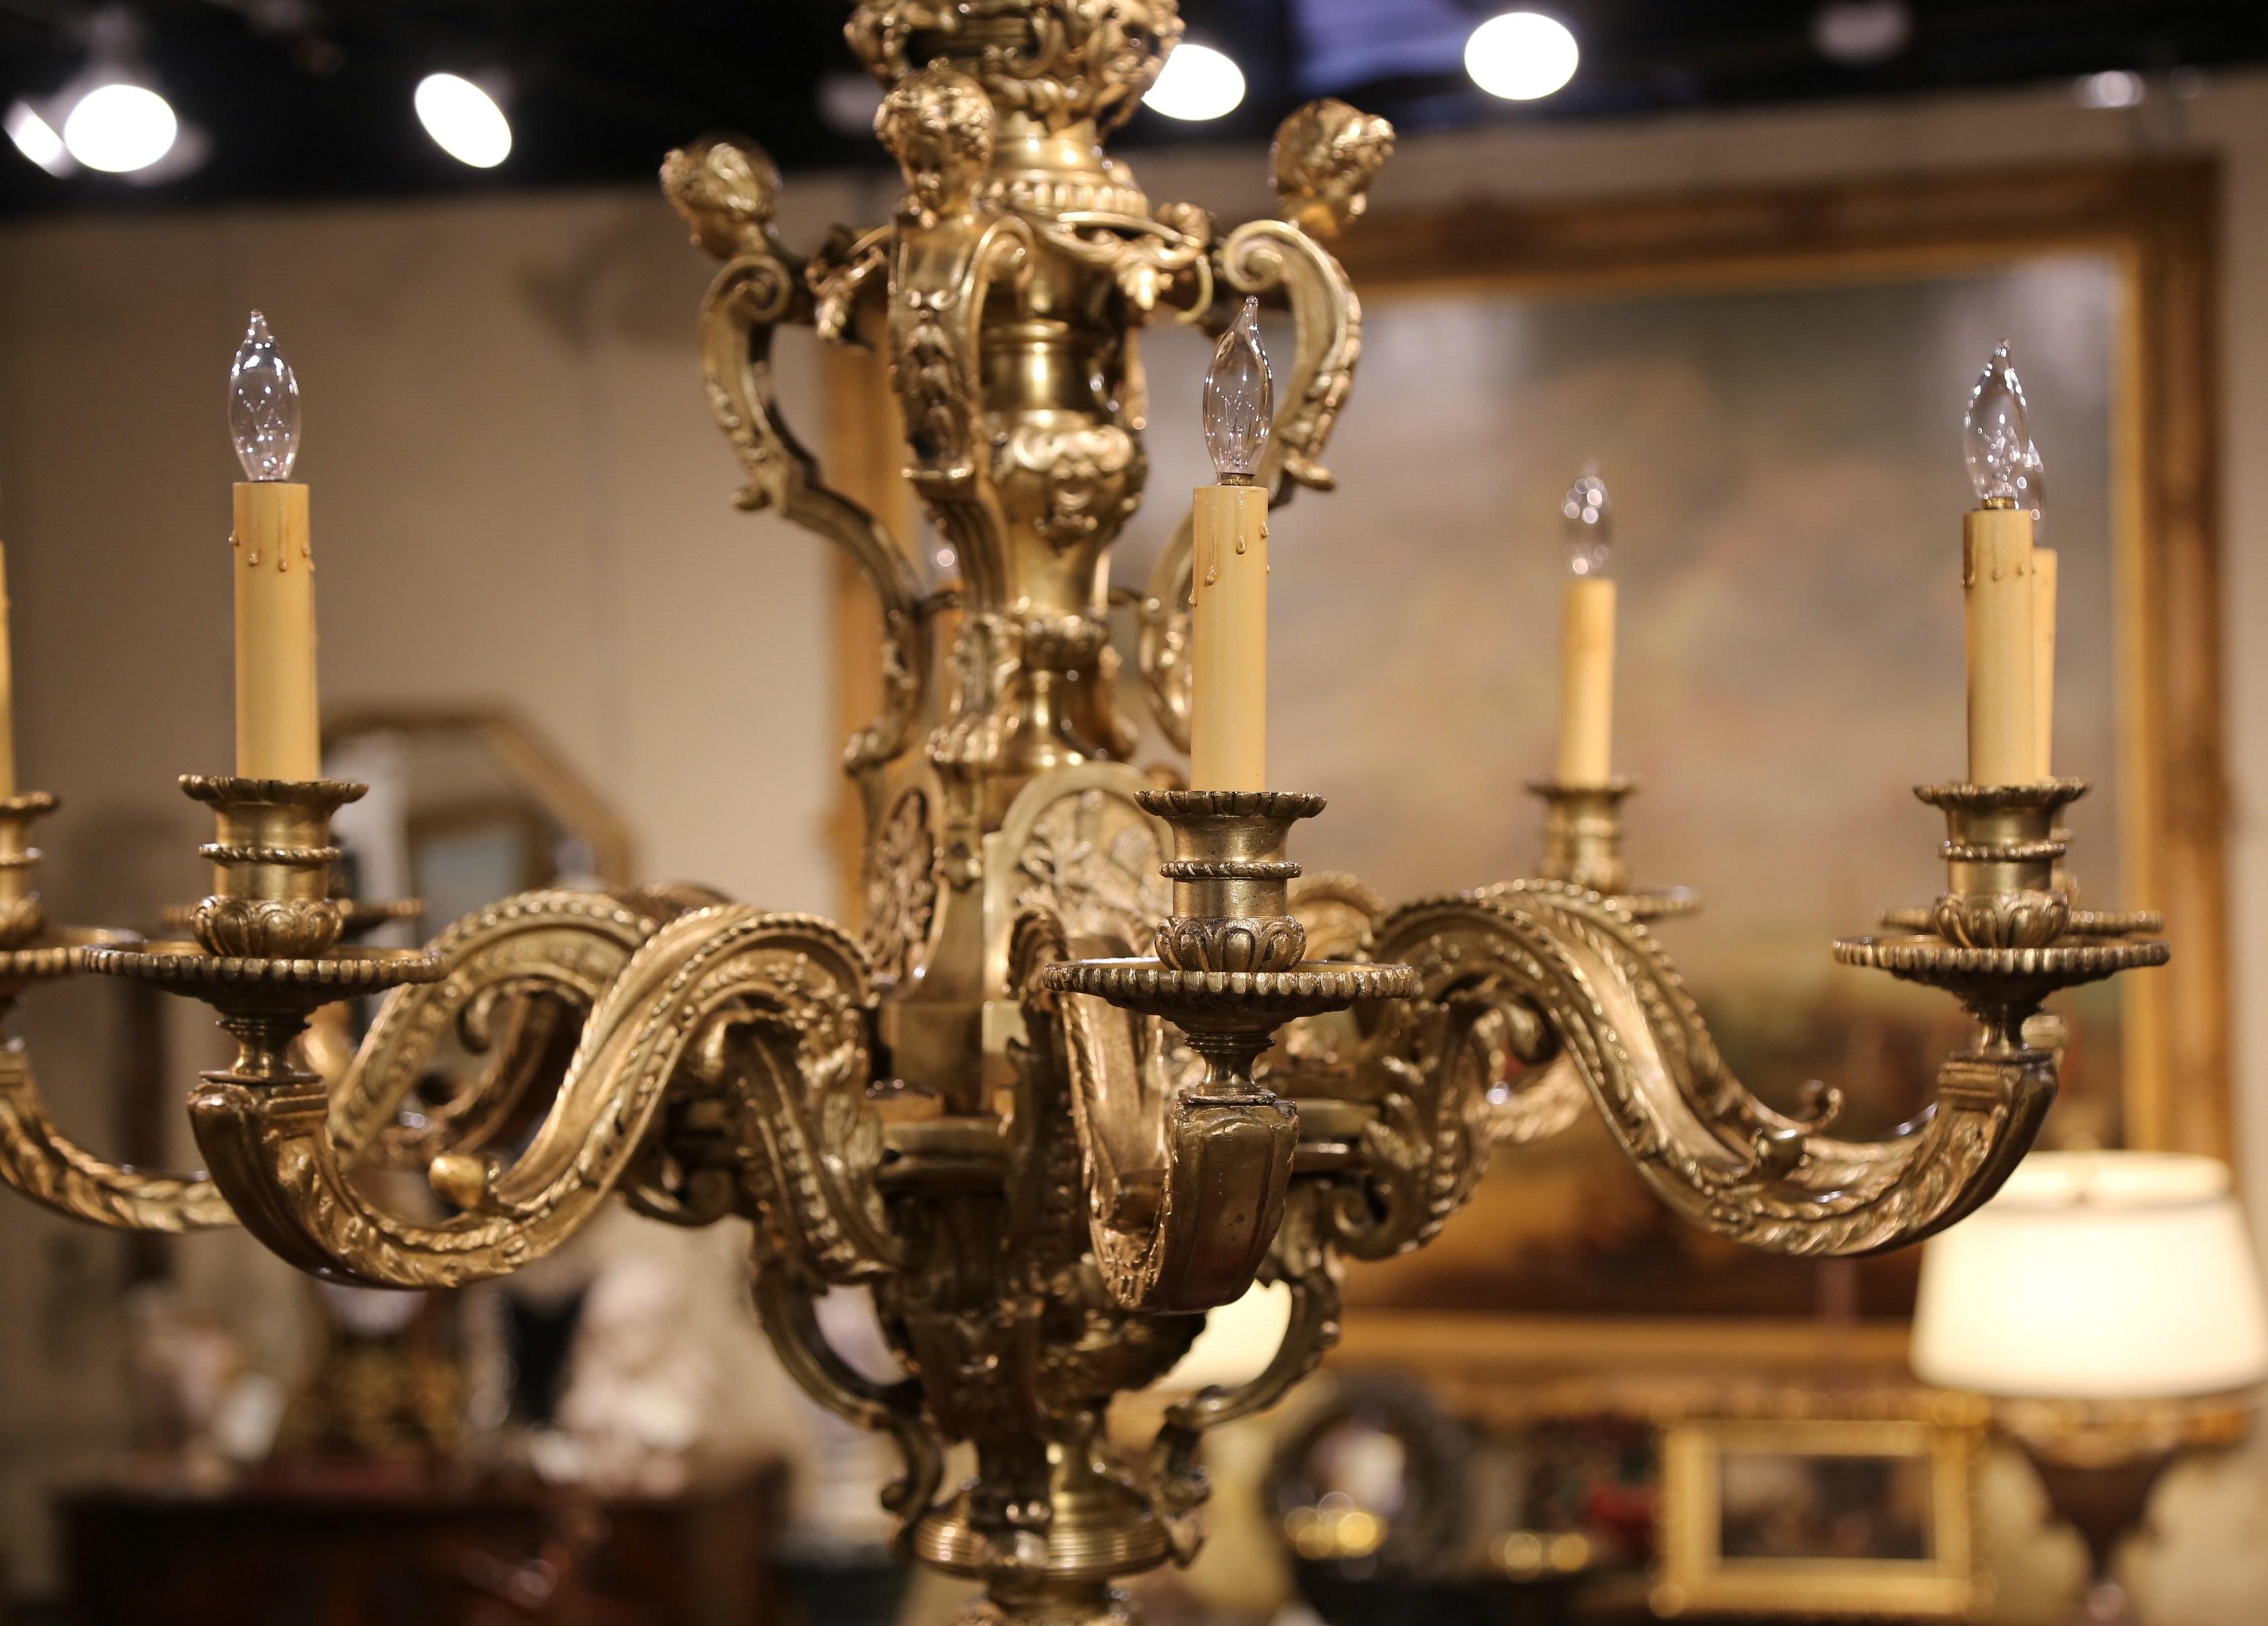 Crafted in France, circa 1880, the important chandelier features four cherubs on the upper part decorated with crossed torches, Fleurs-de-Lys, cartouche shapes, and angel faces with scrolled motifs. The eight-arm lights have been rewired to US